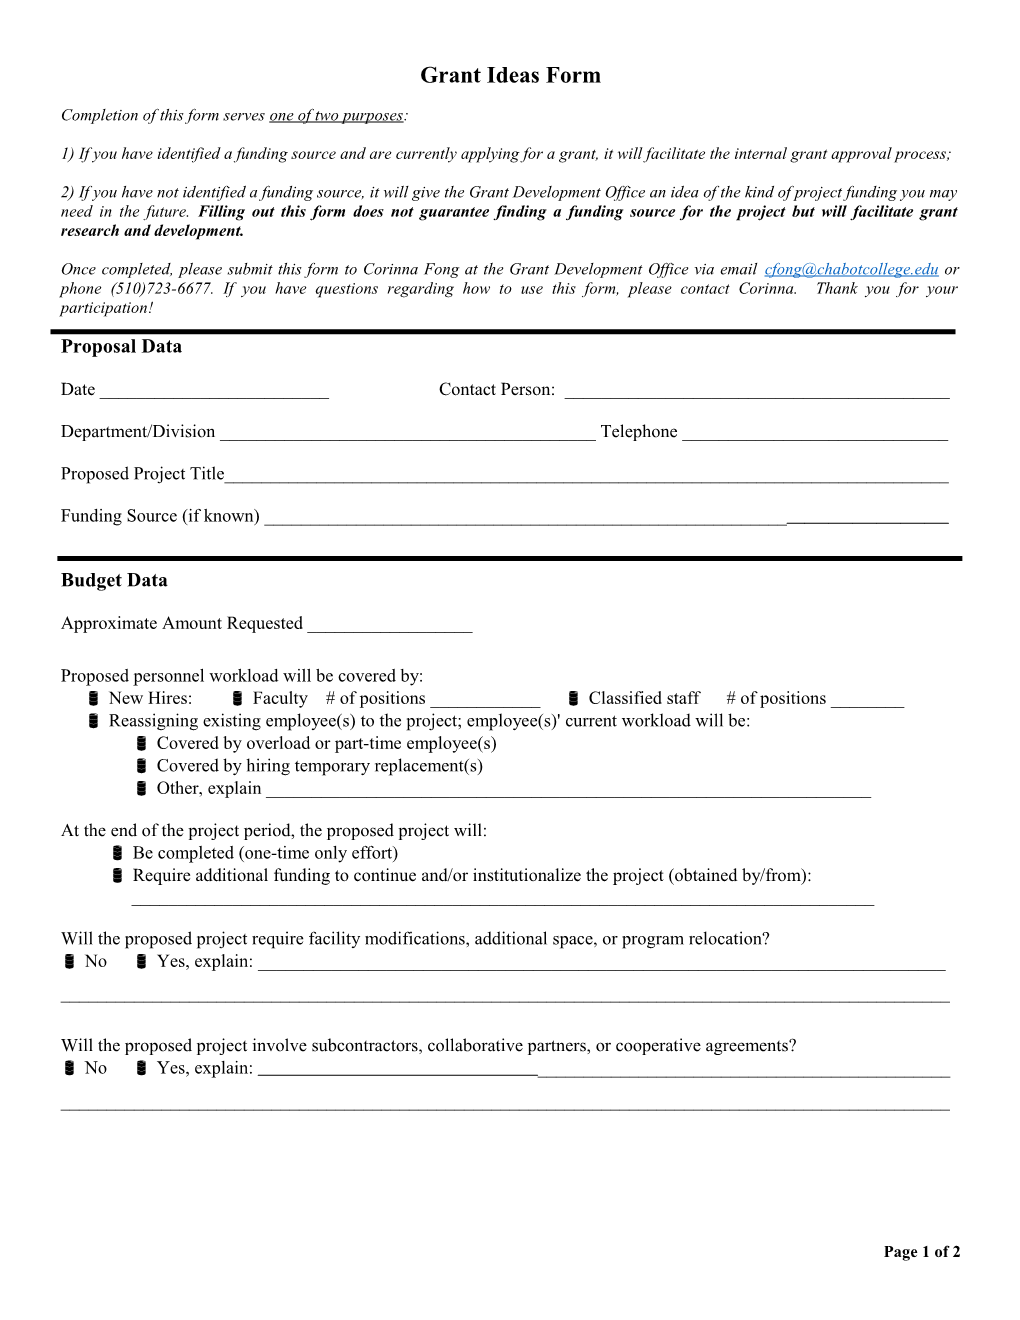 Completion of This Form Serves One of Two Purposes